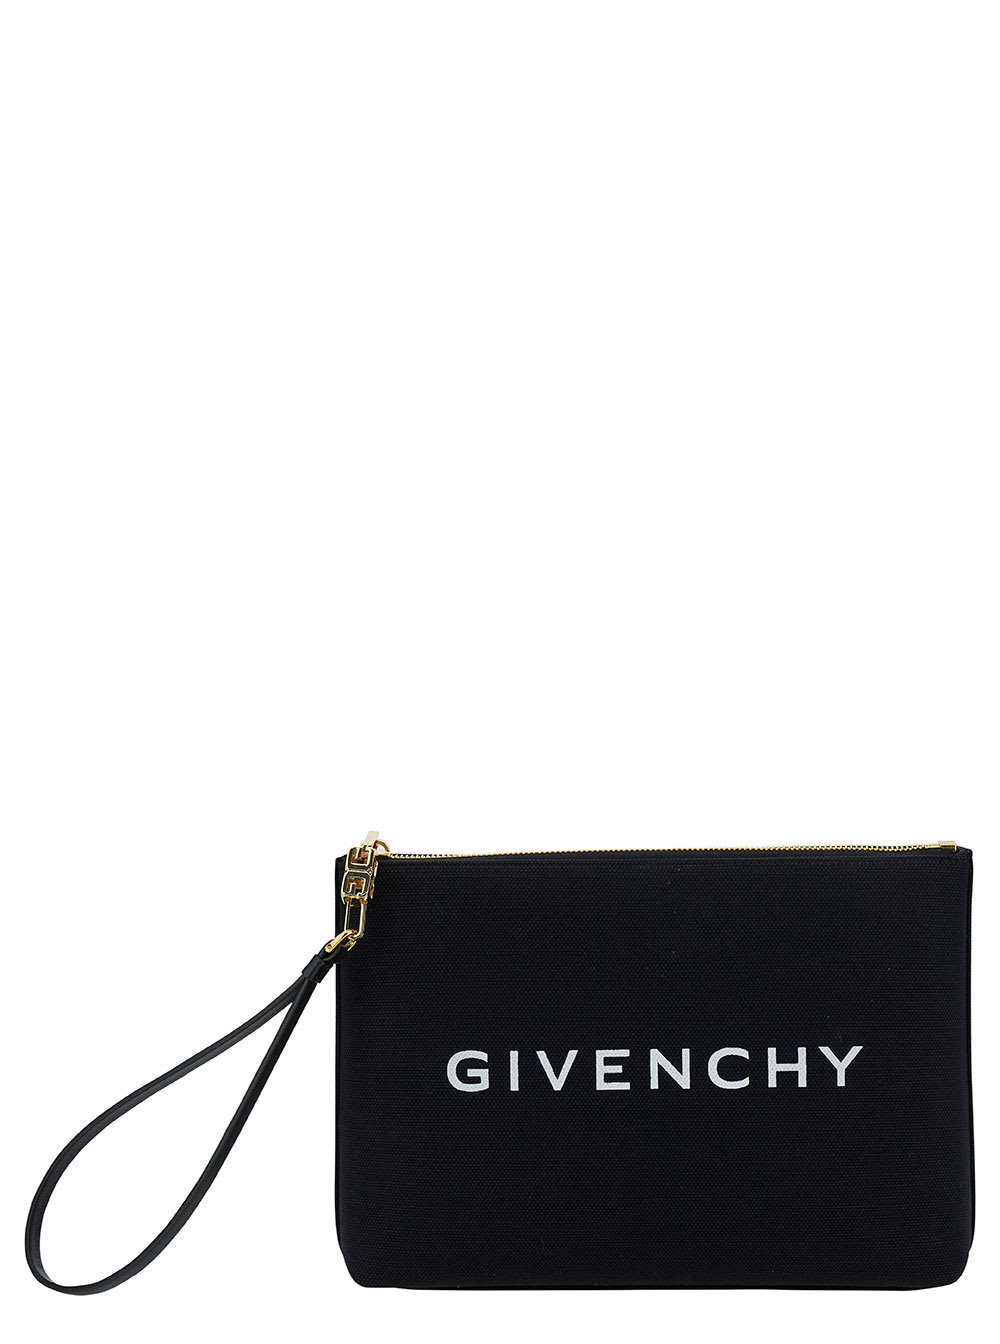 GIVENCHY BLACK CLUTCH WITH CONTRASTING LOGO PRINT IN COTTON BLEND WOMAN